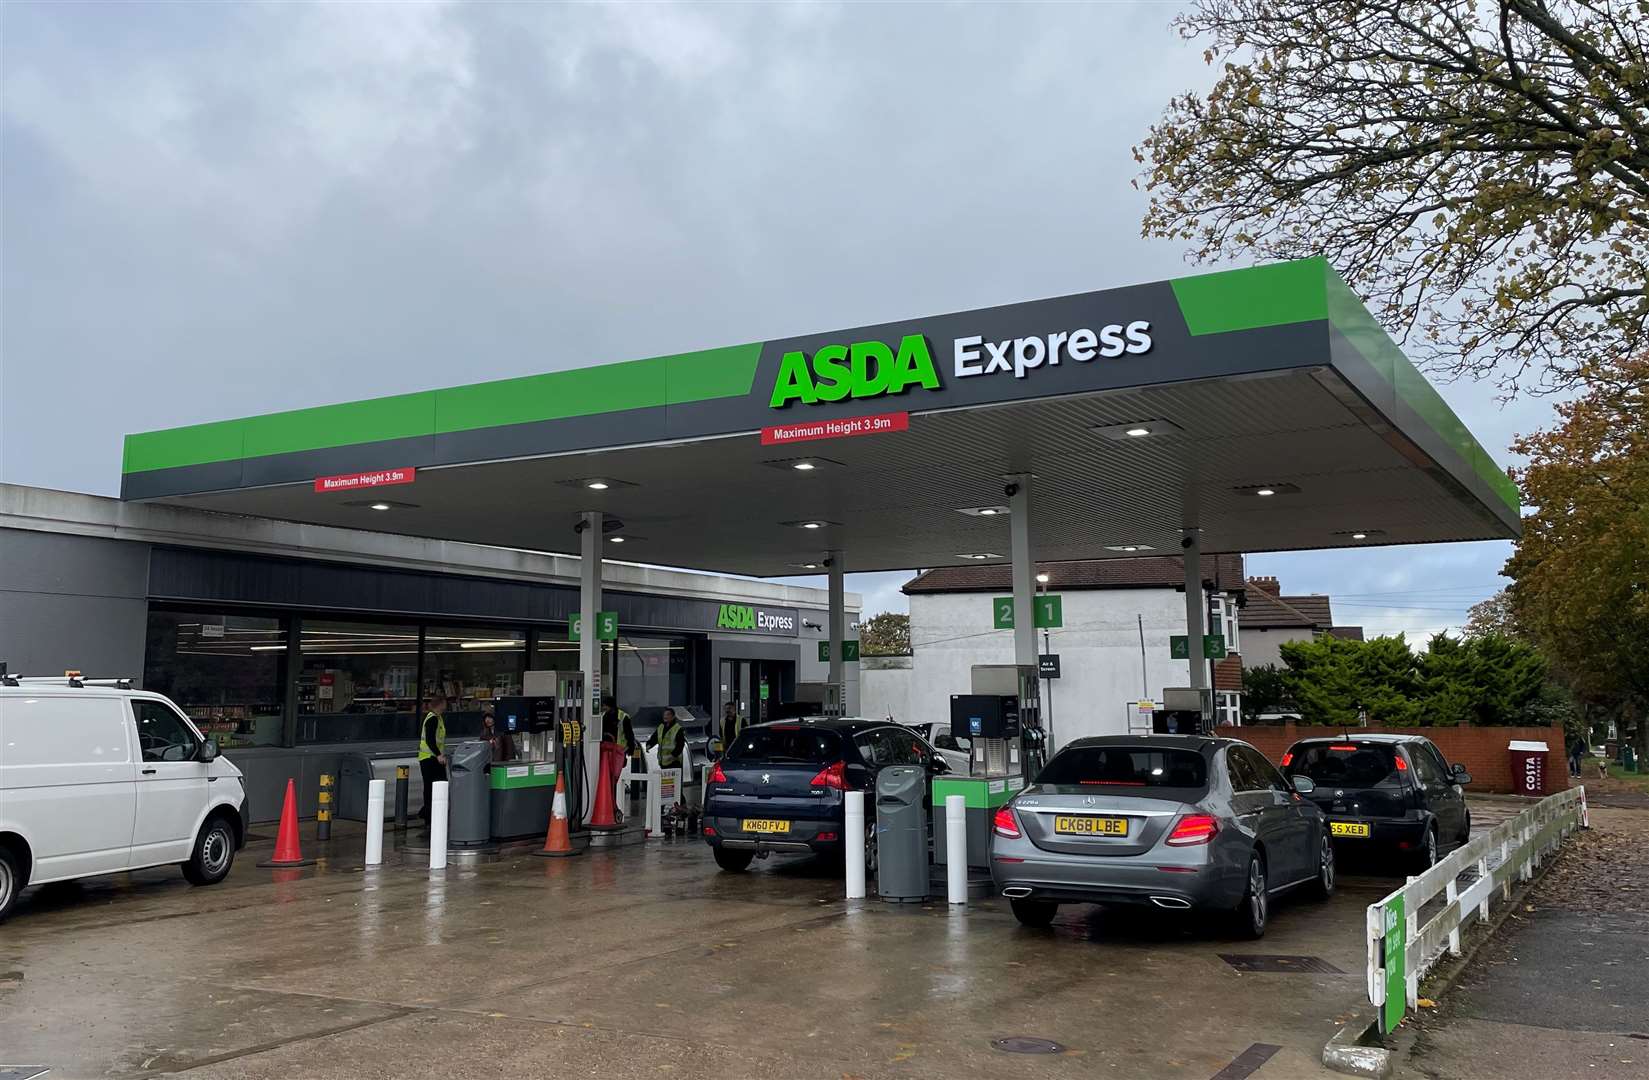 The former Co-op and petrol station in City Way, Rochester has reopened as an Asda Express